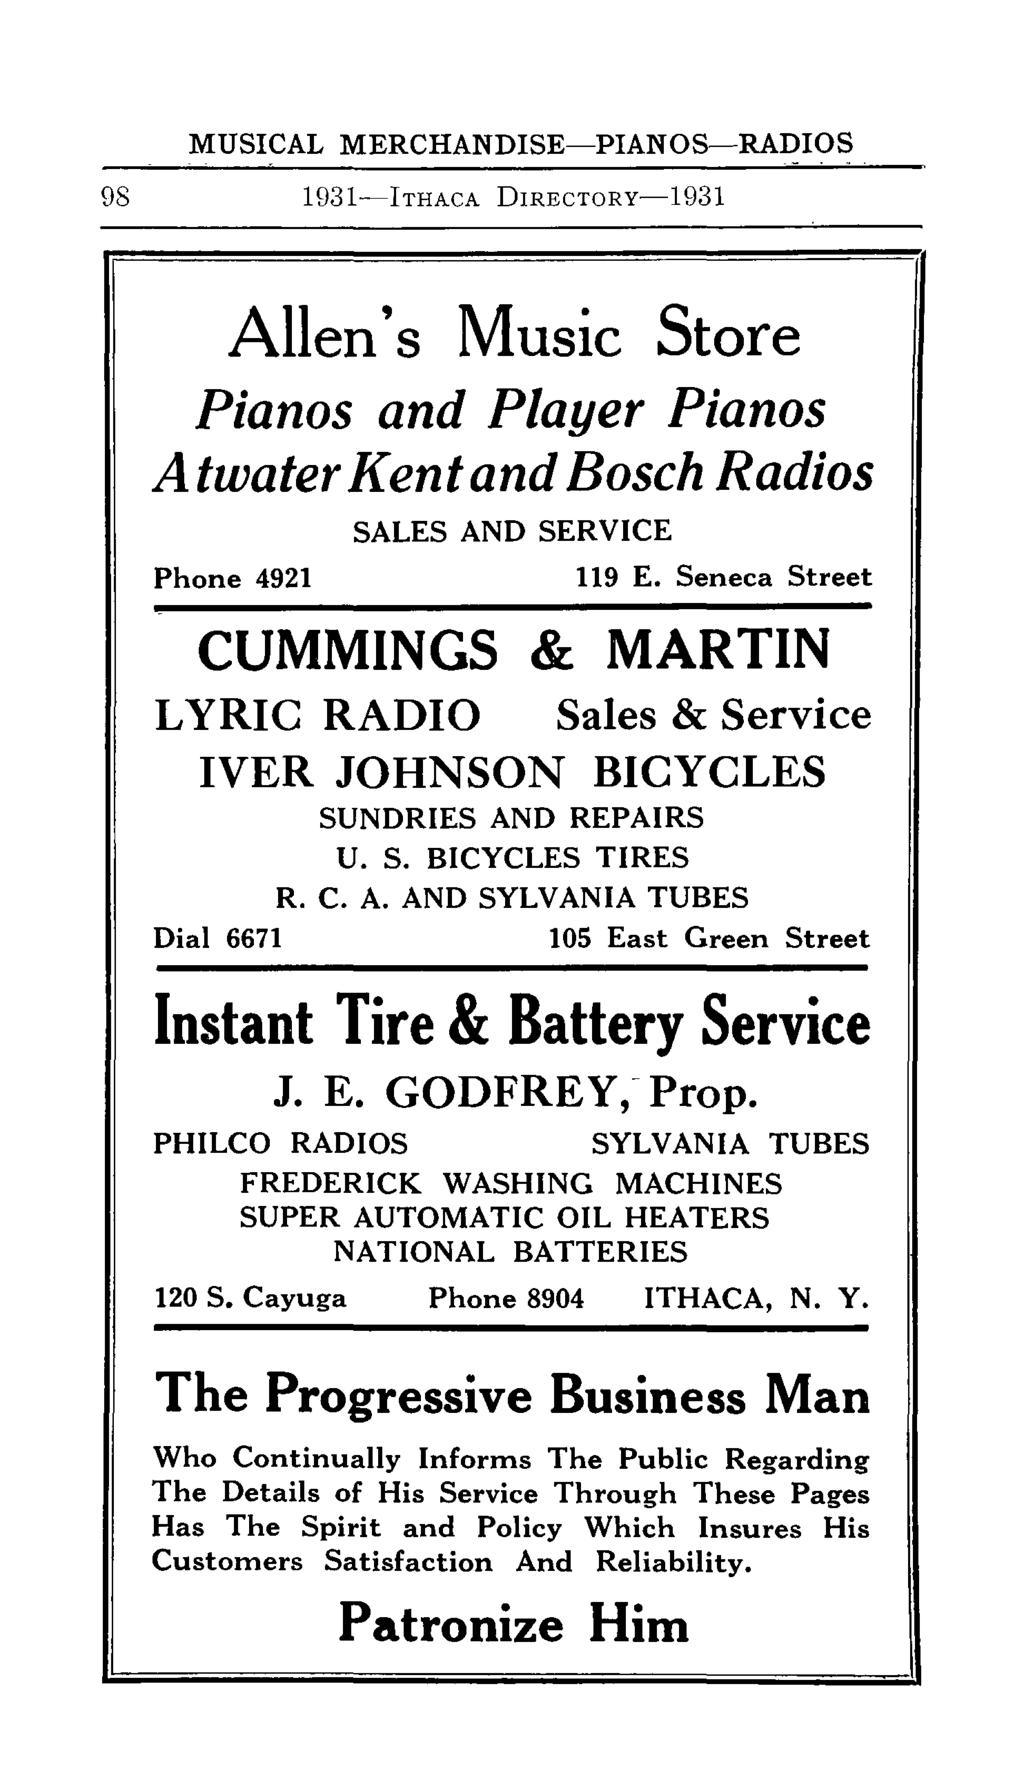 MUSICAL MERCHANDISE-PlANaS-RADIOS. - 98 1931-lTHAcA DIRECTORy-1931 Allen's Music Store Pianos and Player Pianos AtwaterKentand Bosch Radios Phone 4921 SALES AND SERVICE 119 E.